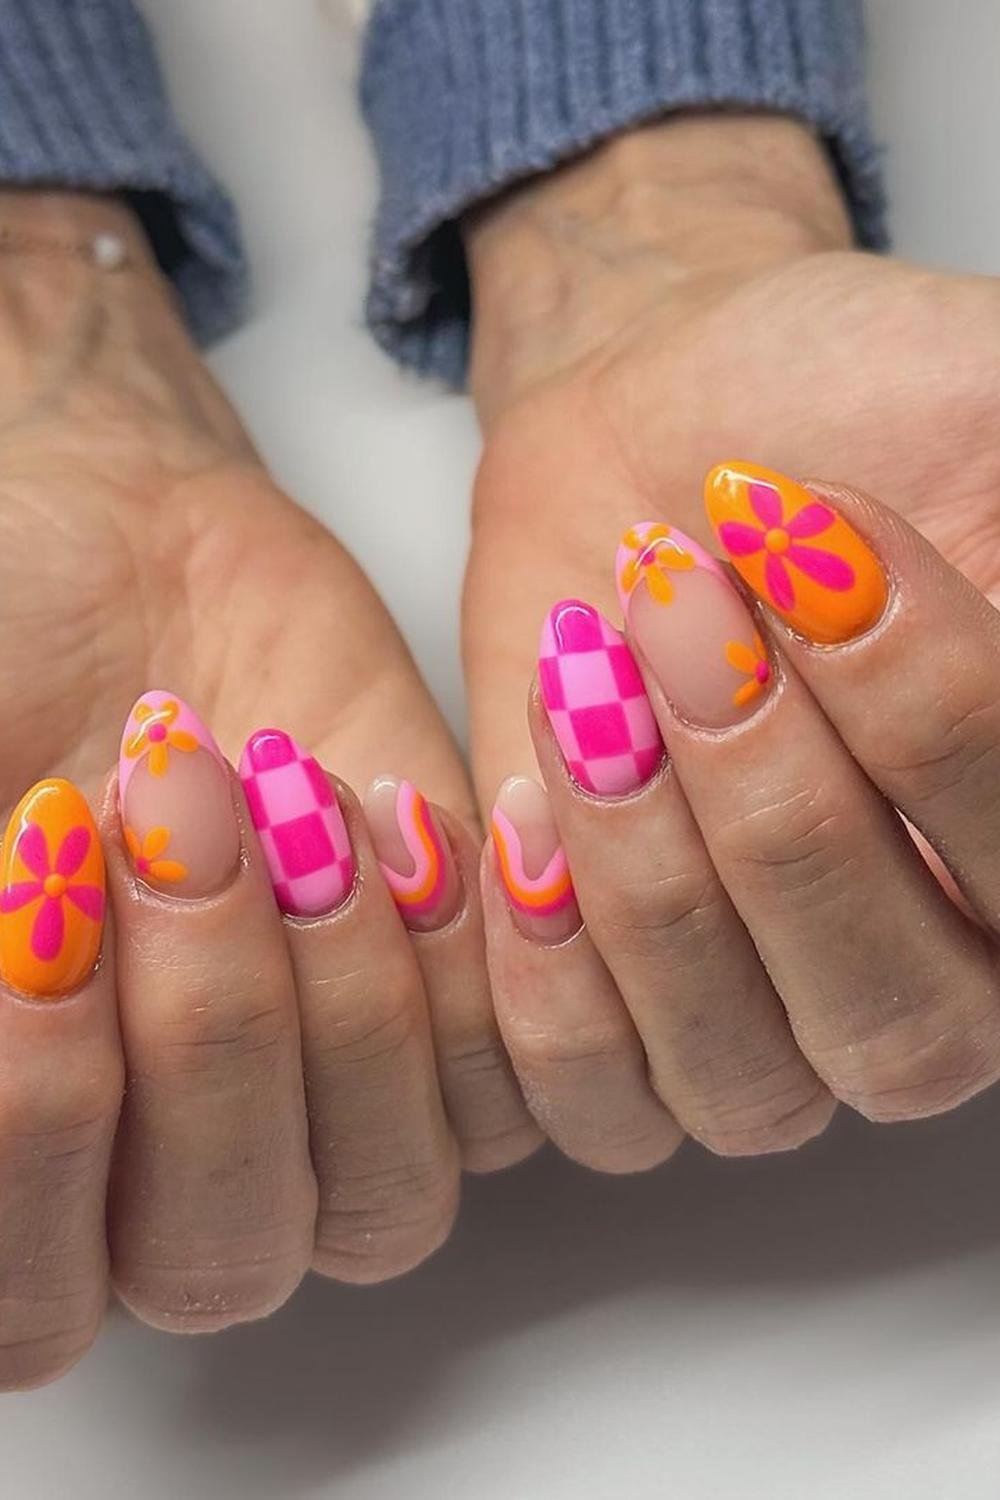 39 - Picture of Pink and Orange Nails